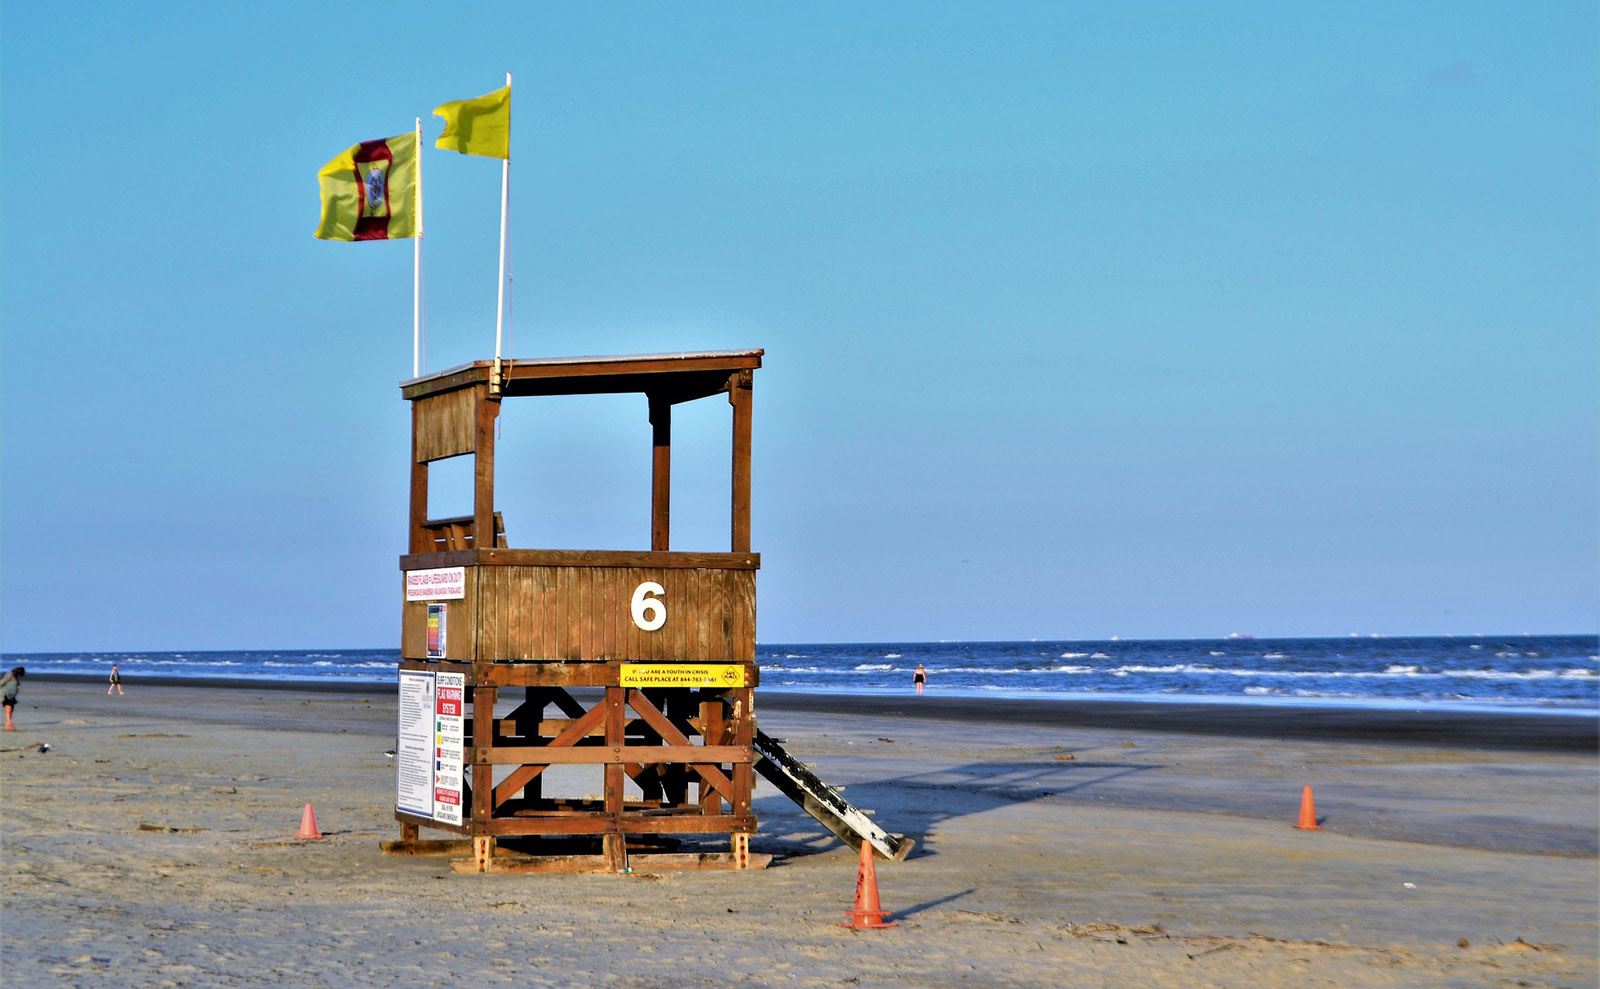 sand beach with a colorful vintage lifeguard station